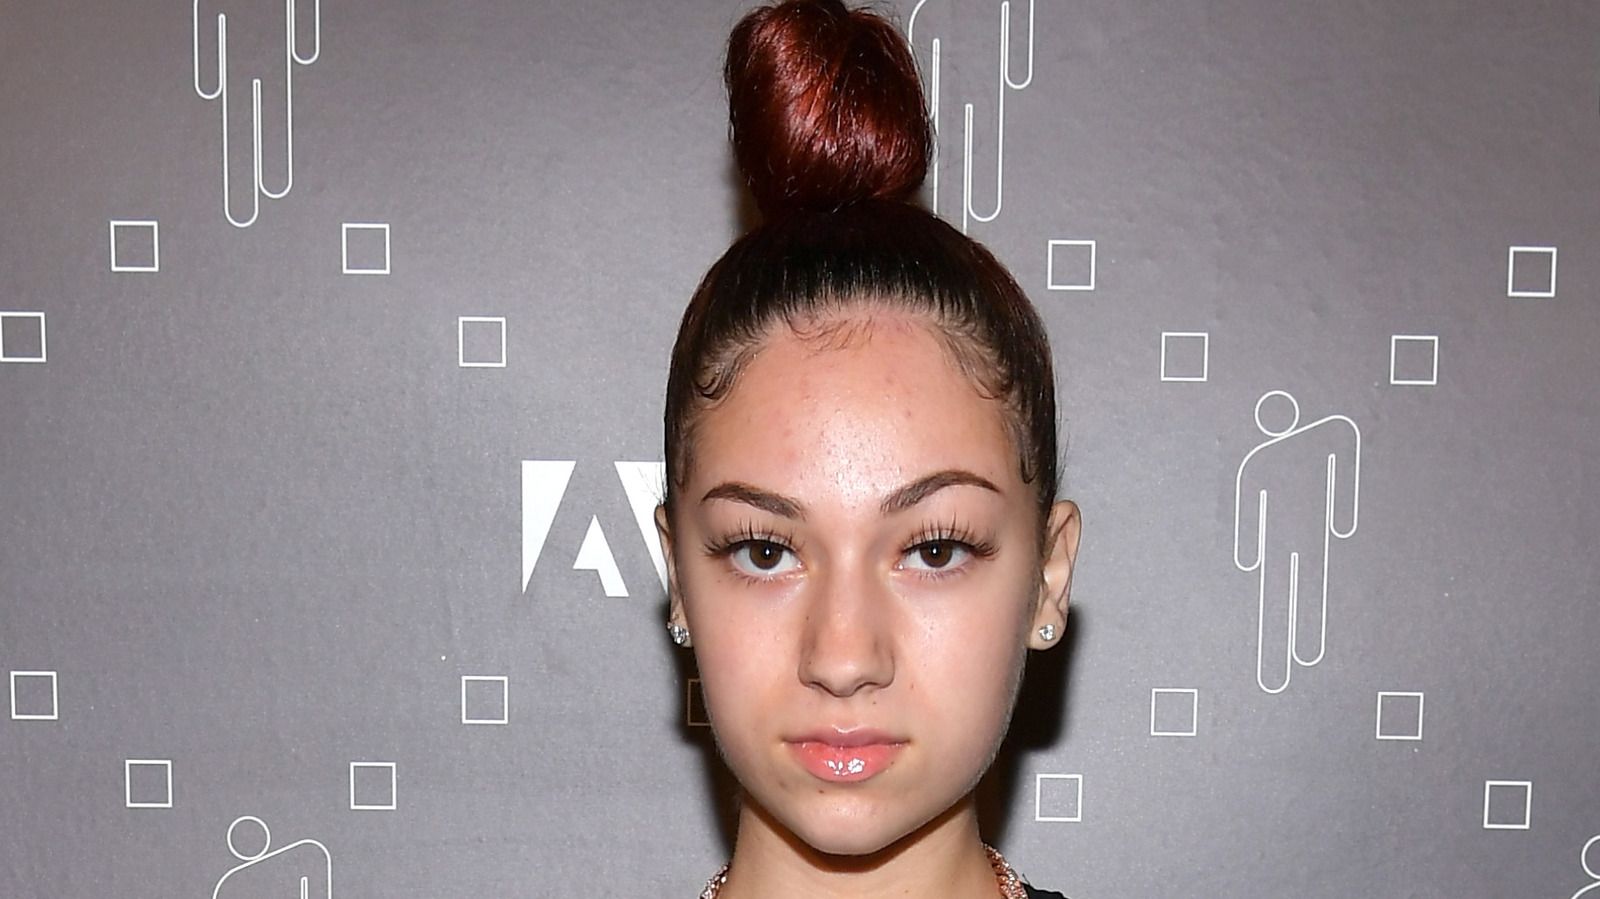 Bhabie onlyfans posts bhad blog.noonswoonapp.com: over